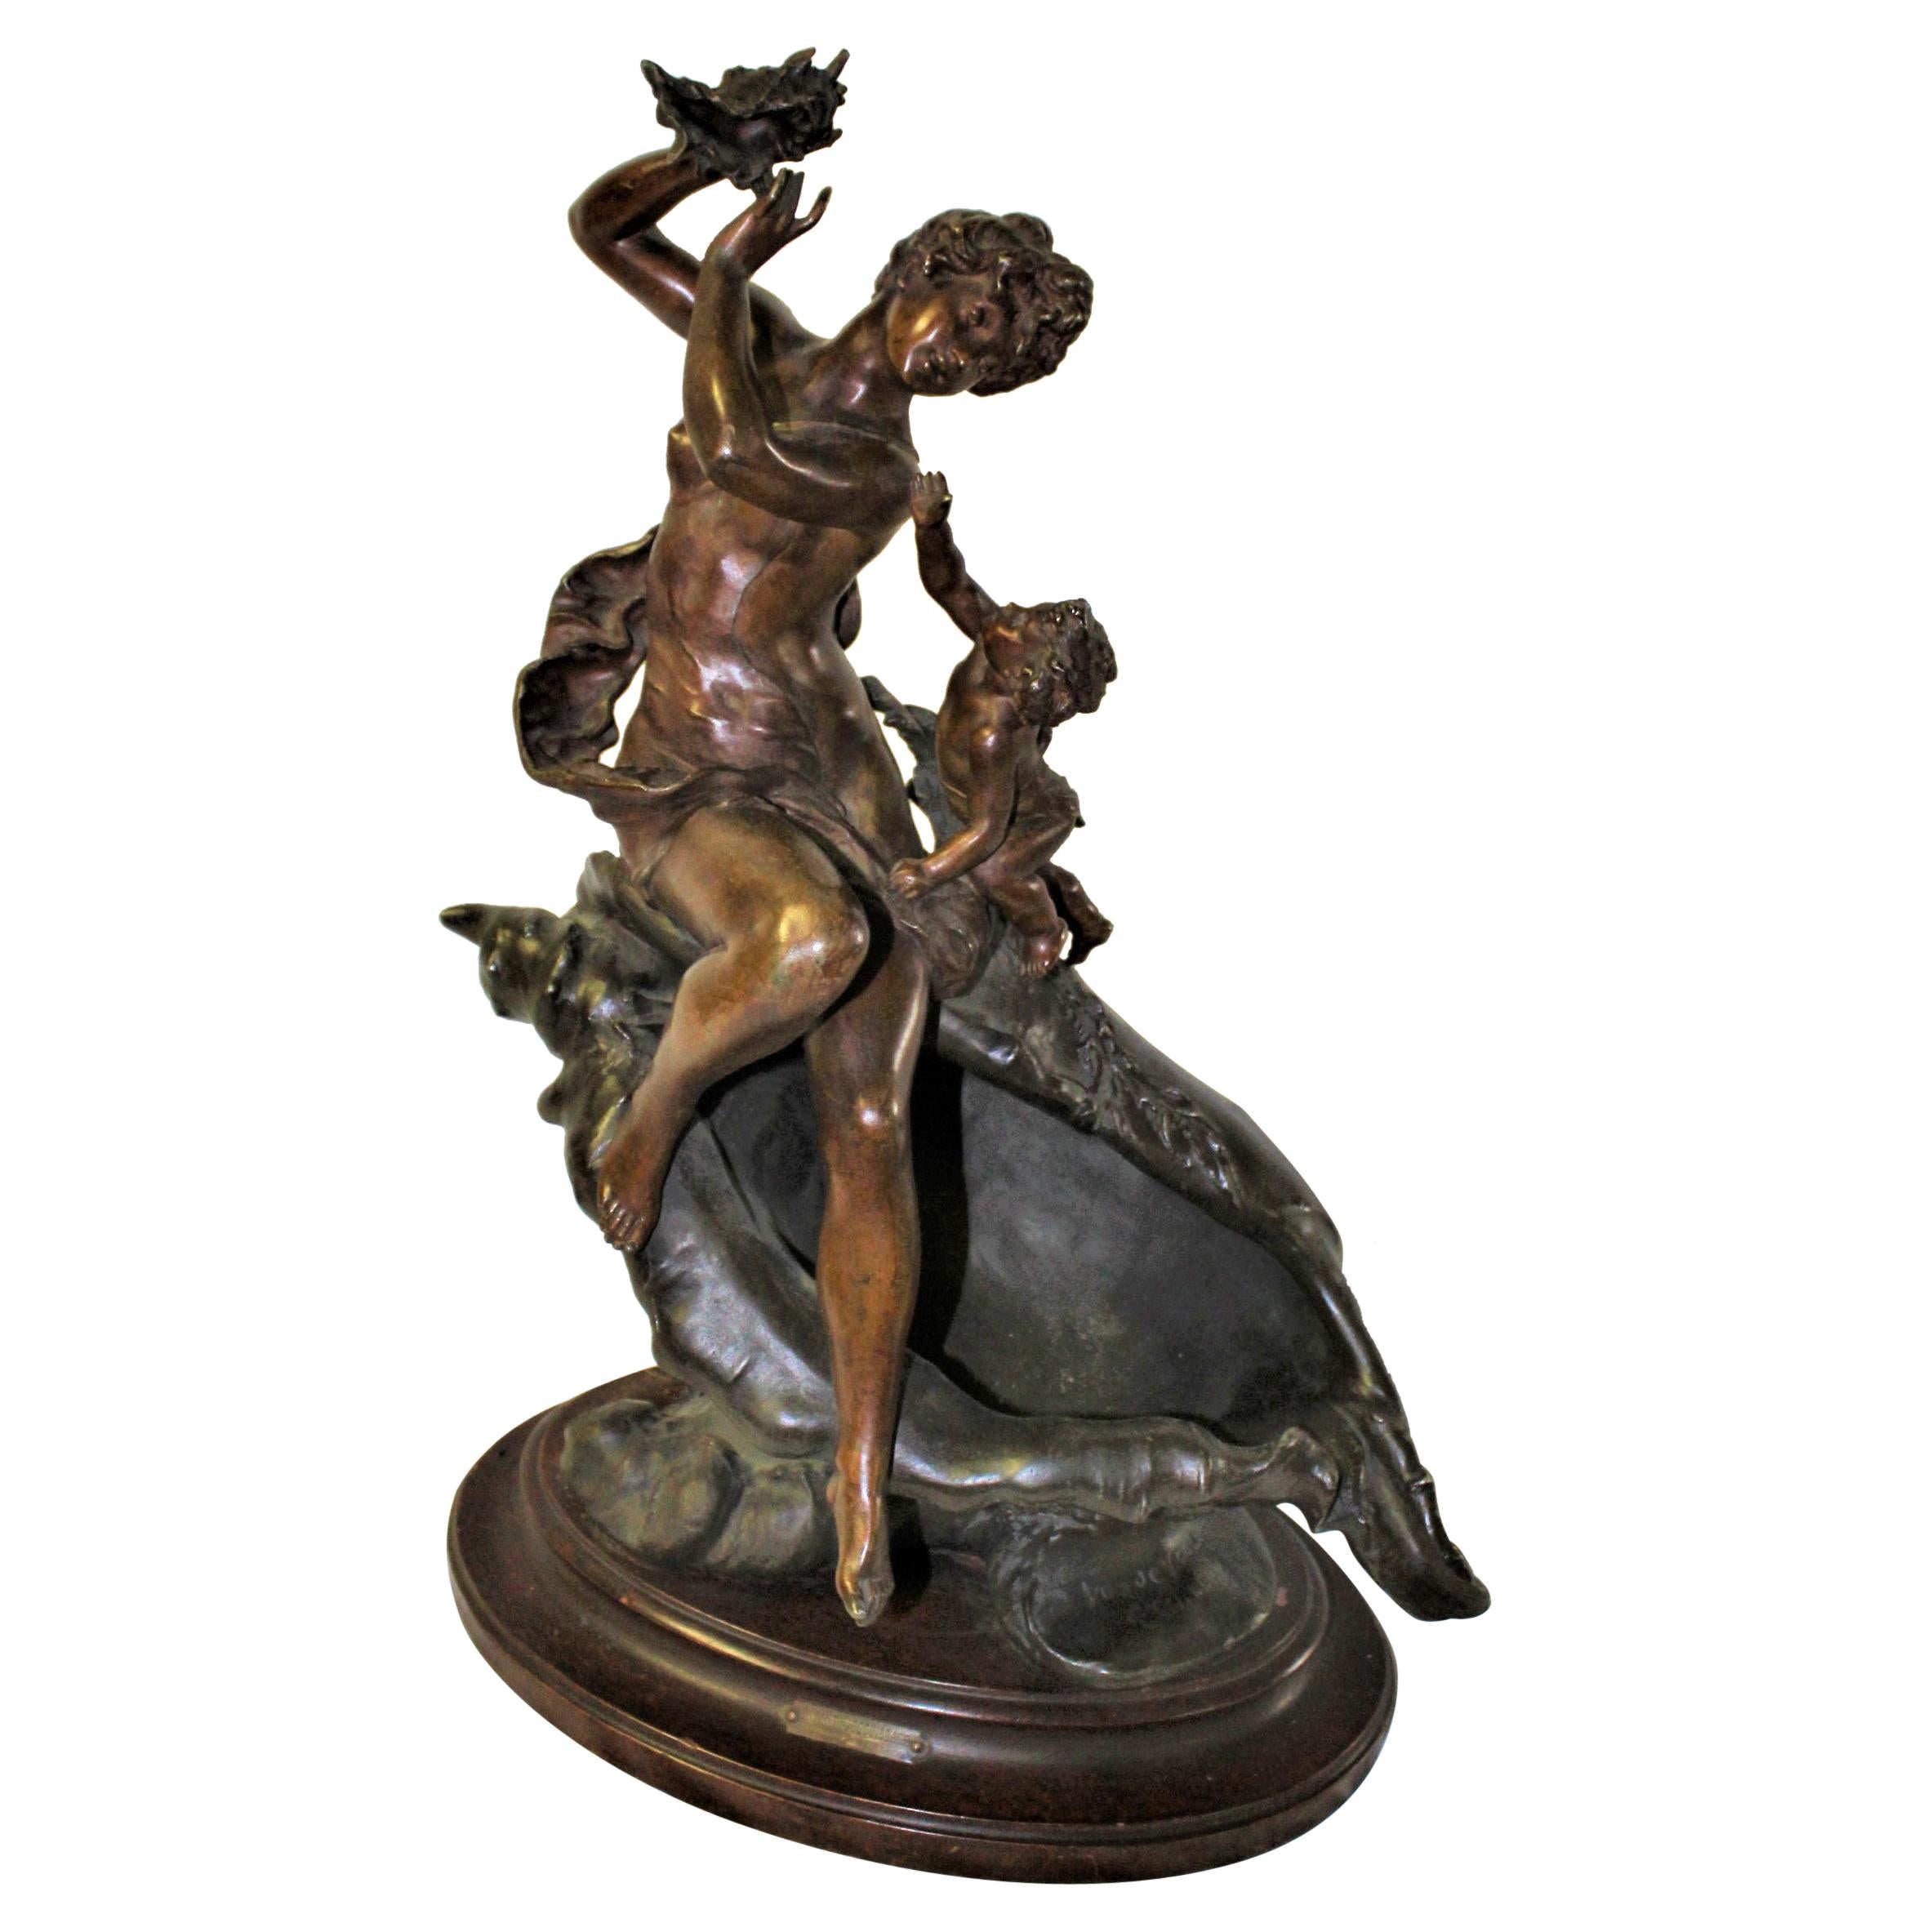 Original Female Nude on a Shell with Putti, Art Nouveau 1890, s Signed